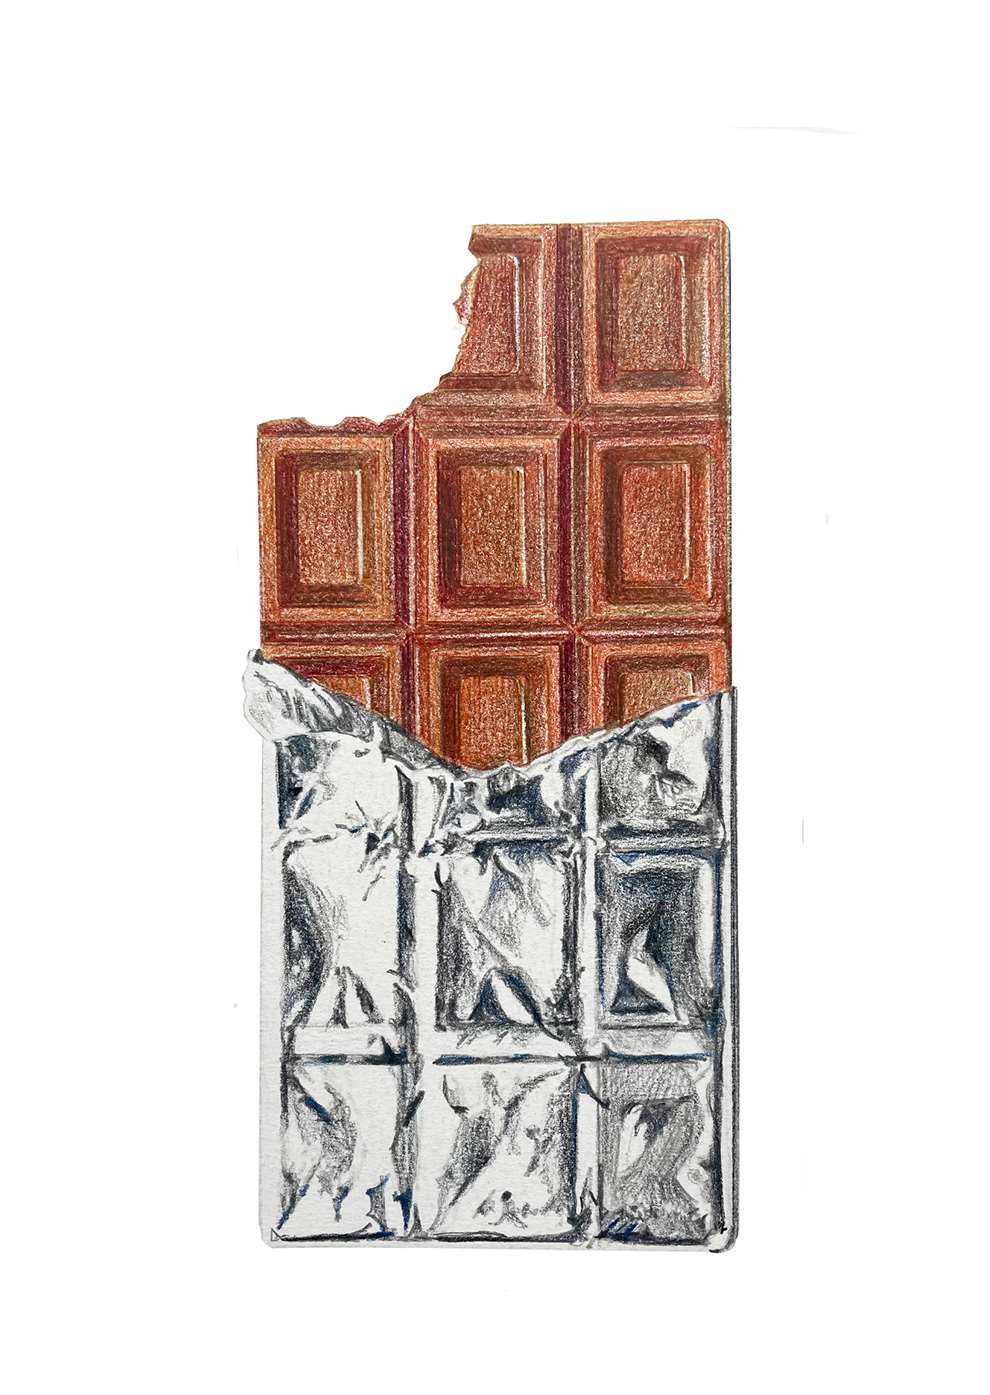 Pencil on Paper, Illustration of a chocolate bar using a pencil for shading, gradient and texture.